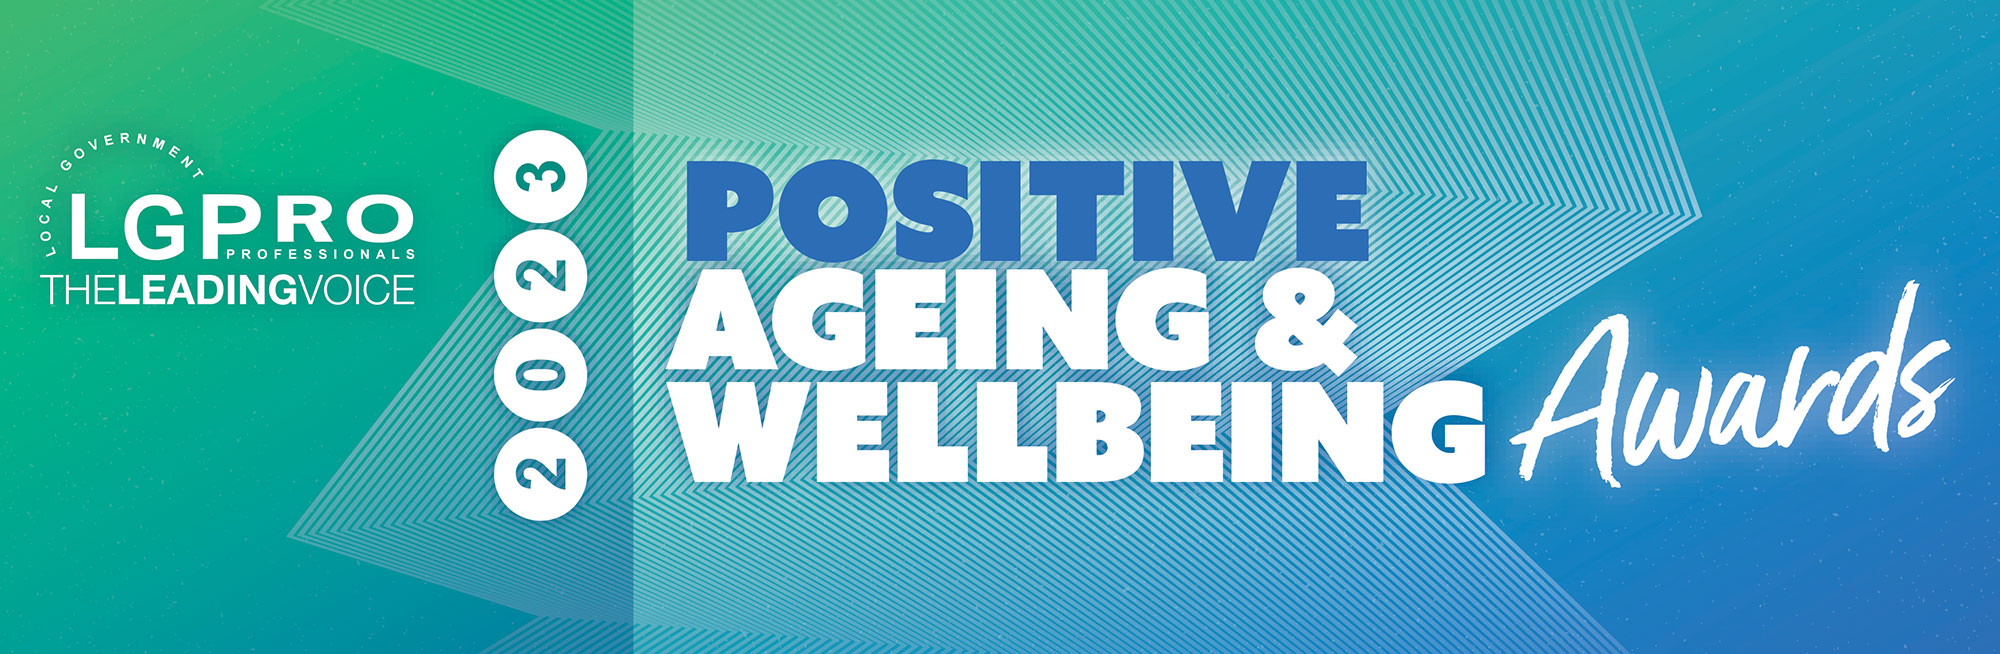 Positive Ageing & Wellbeing Awards